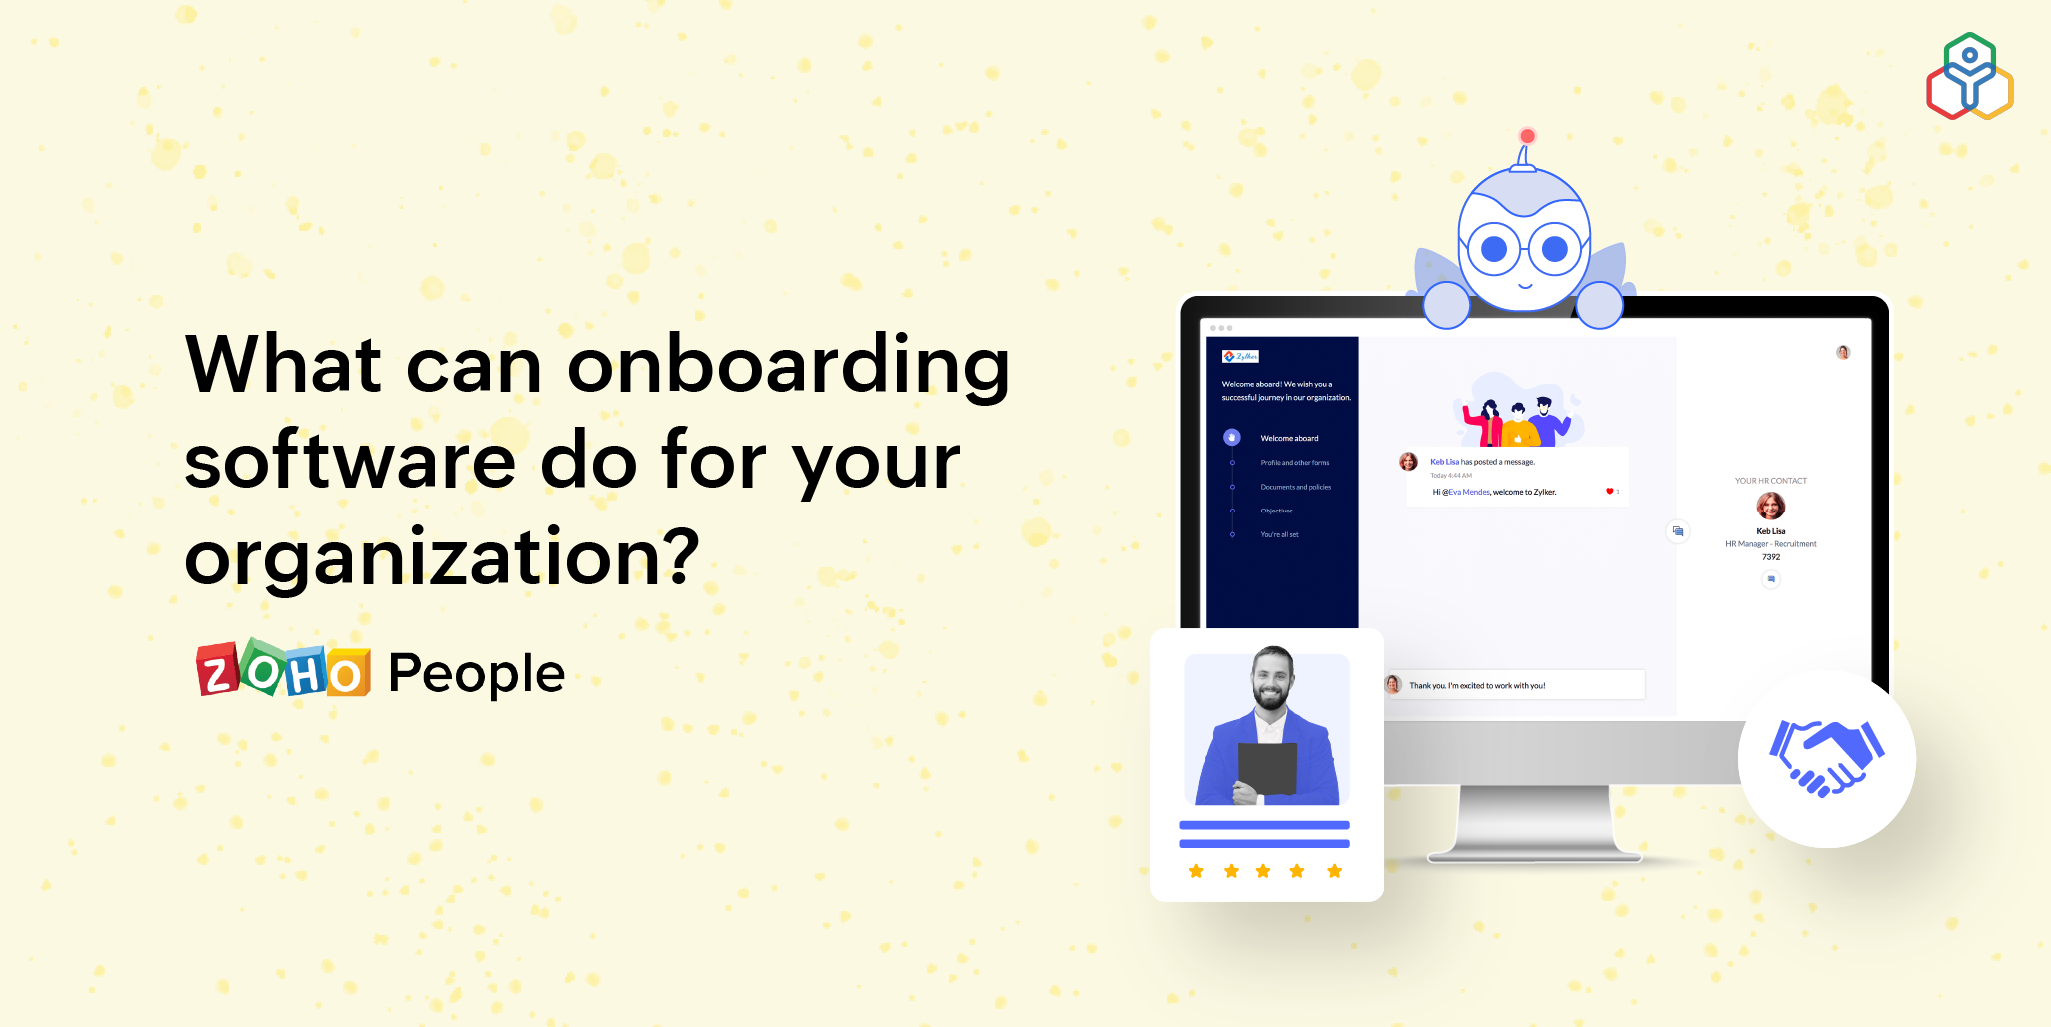 What can onboarding software do for your organization?